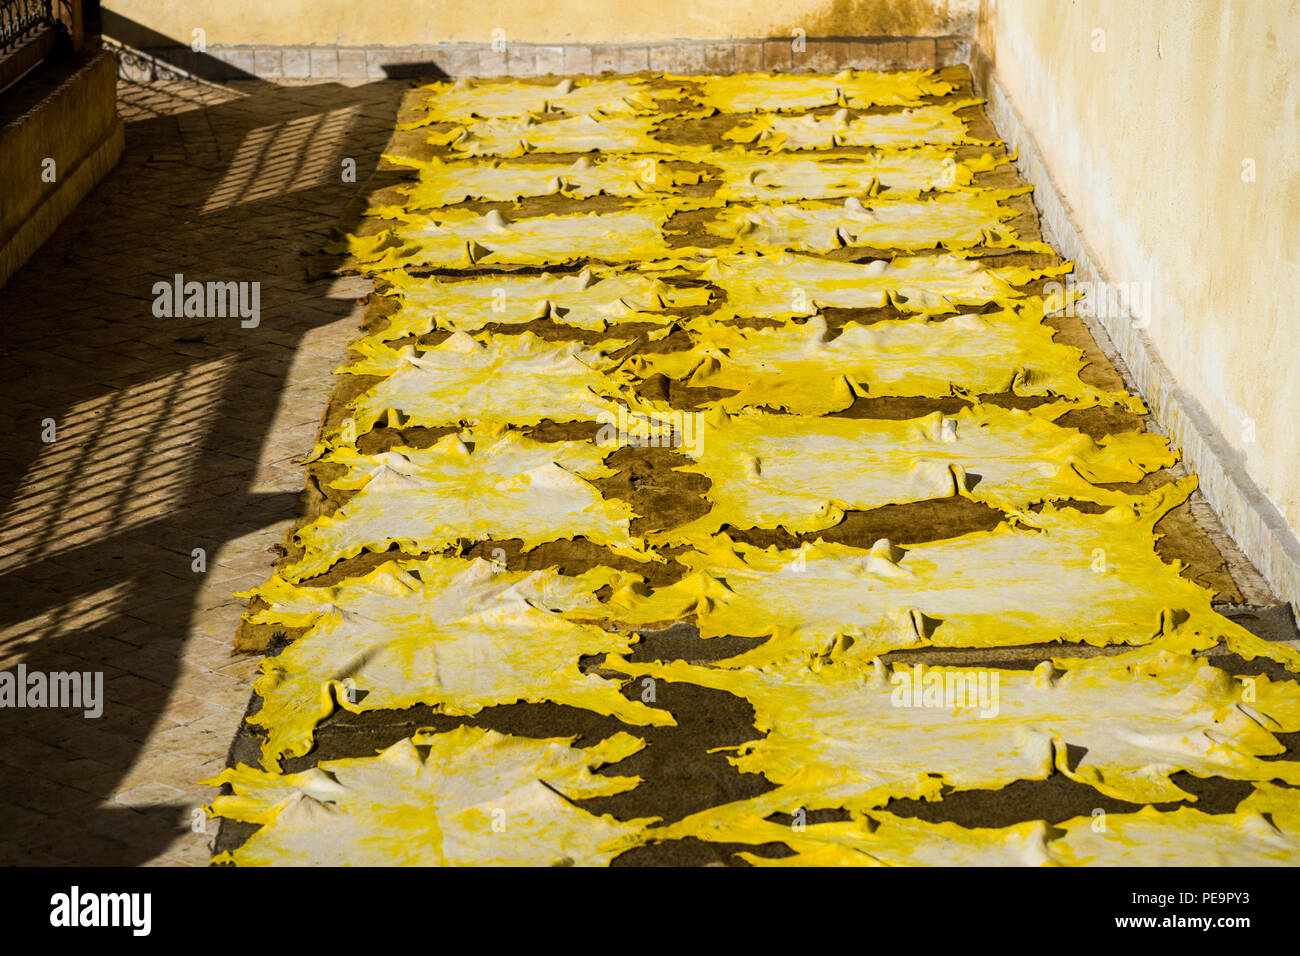 Yellow colored animal skin drying after treatment in leather tannery Stock Photo